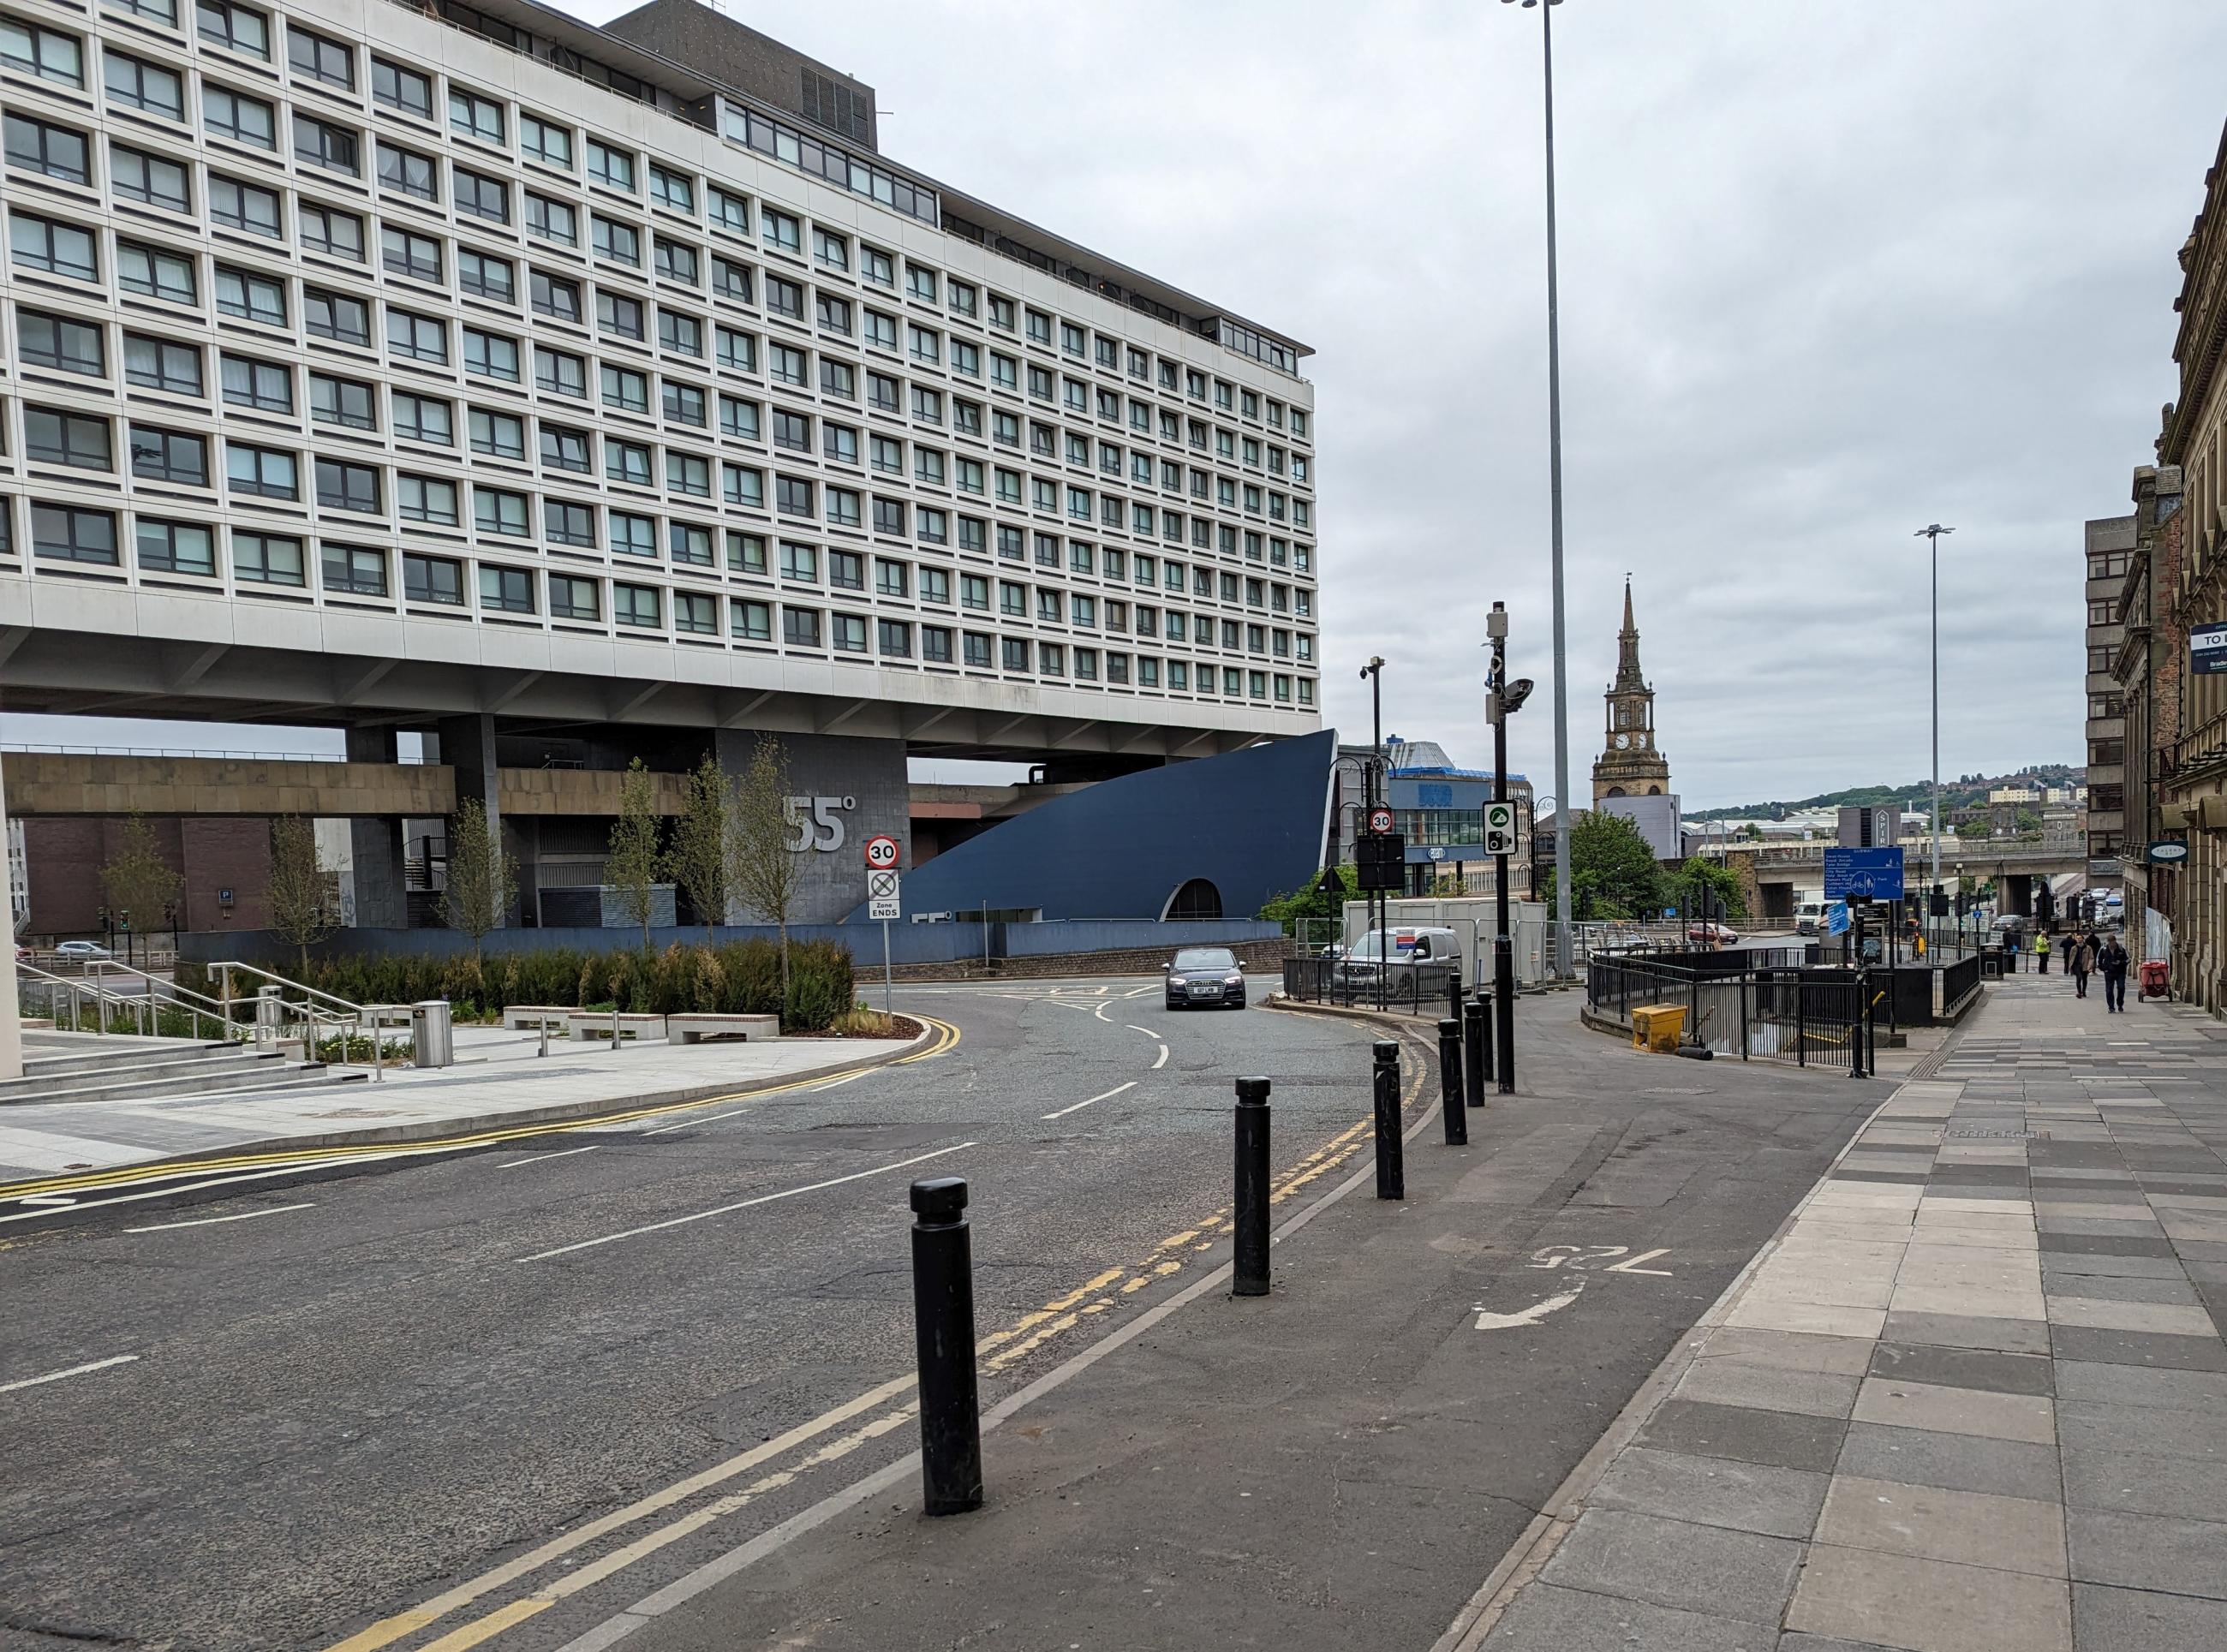 Photo shows the bottom of Pilgrim Street in Newcastle looking down towards the Swan House roundabout.